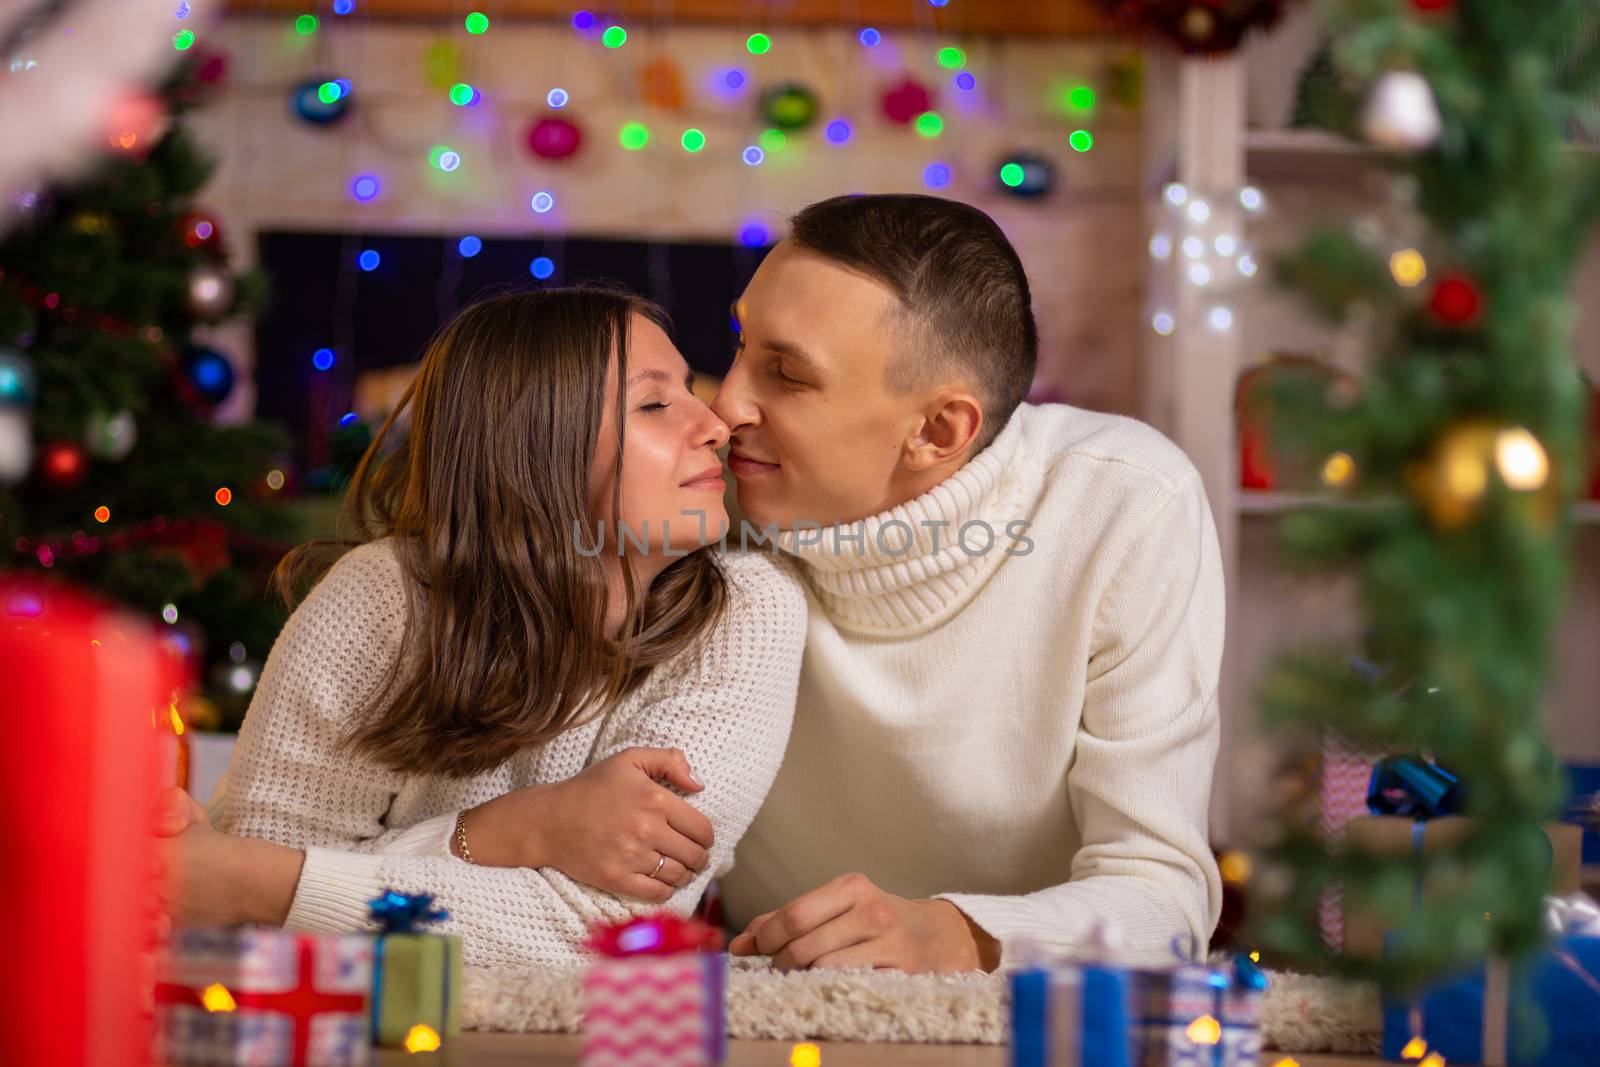 heterosexual couple hugs in a decorated room on Christmas day